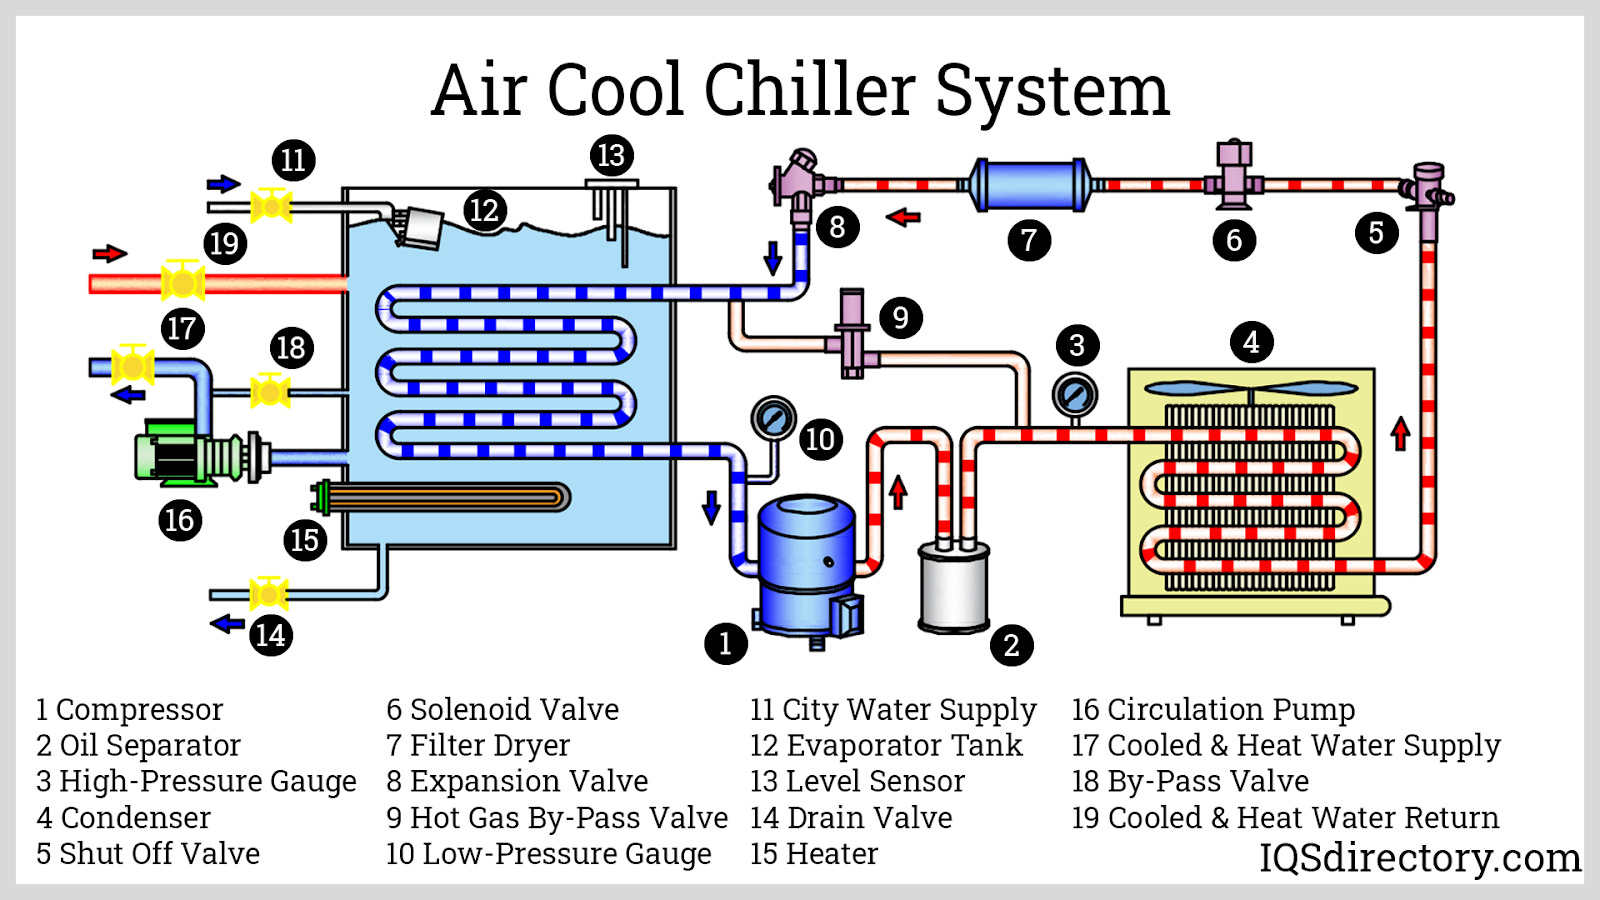 Air Cool Chiller System